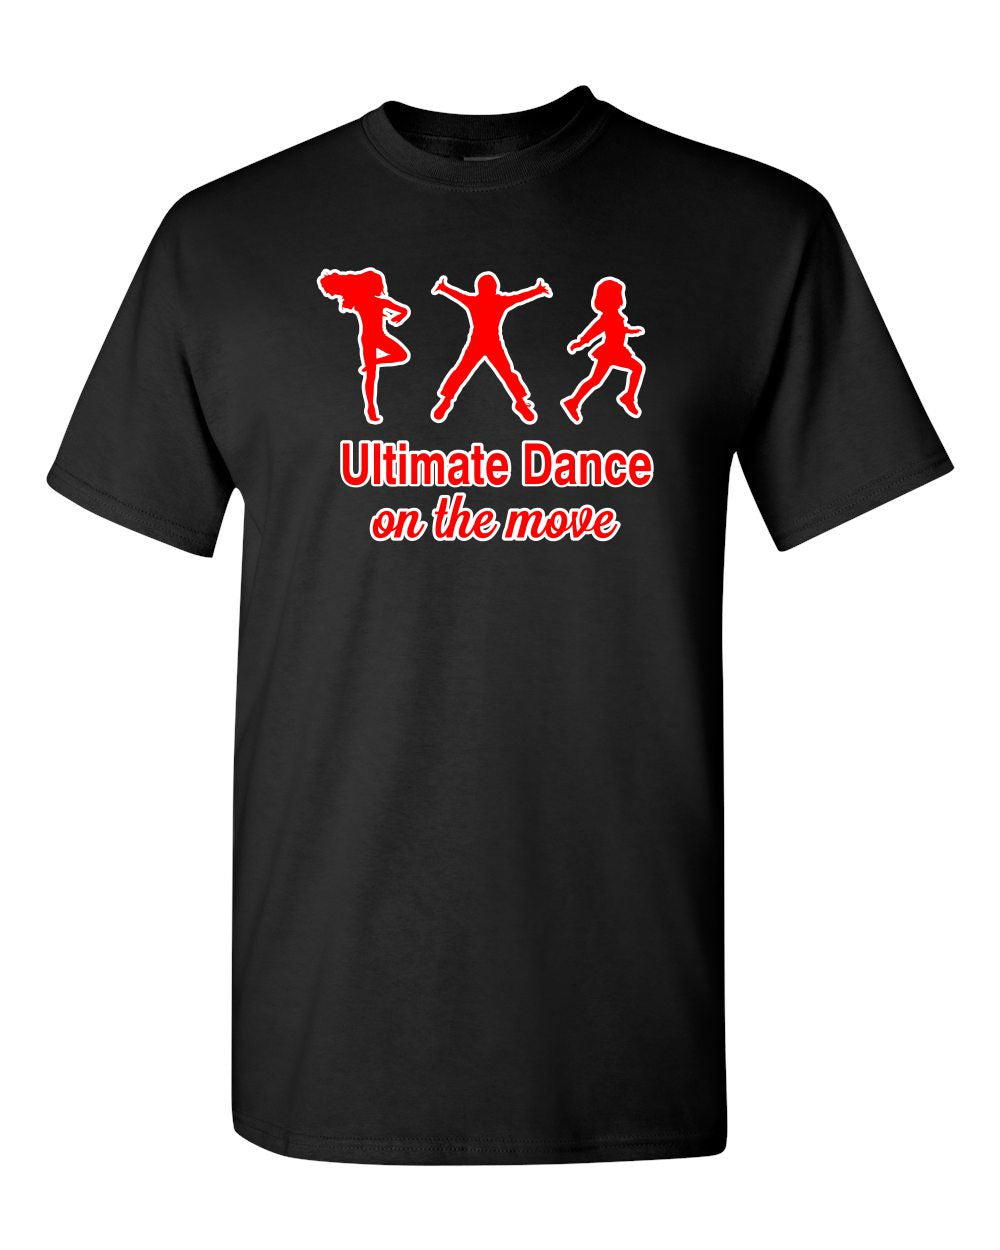 Ultimate Dance On The Move Short Sleeve T-Shirt for Dad's and Male Dancer's